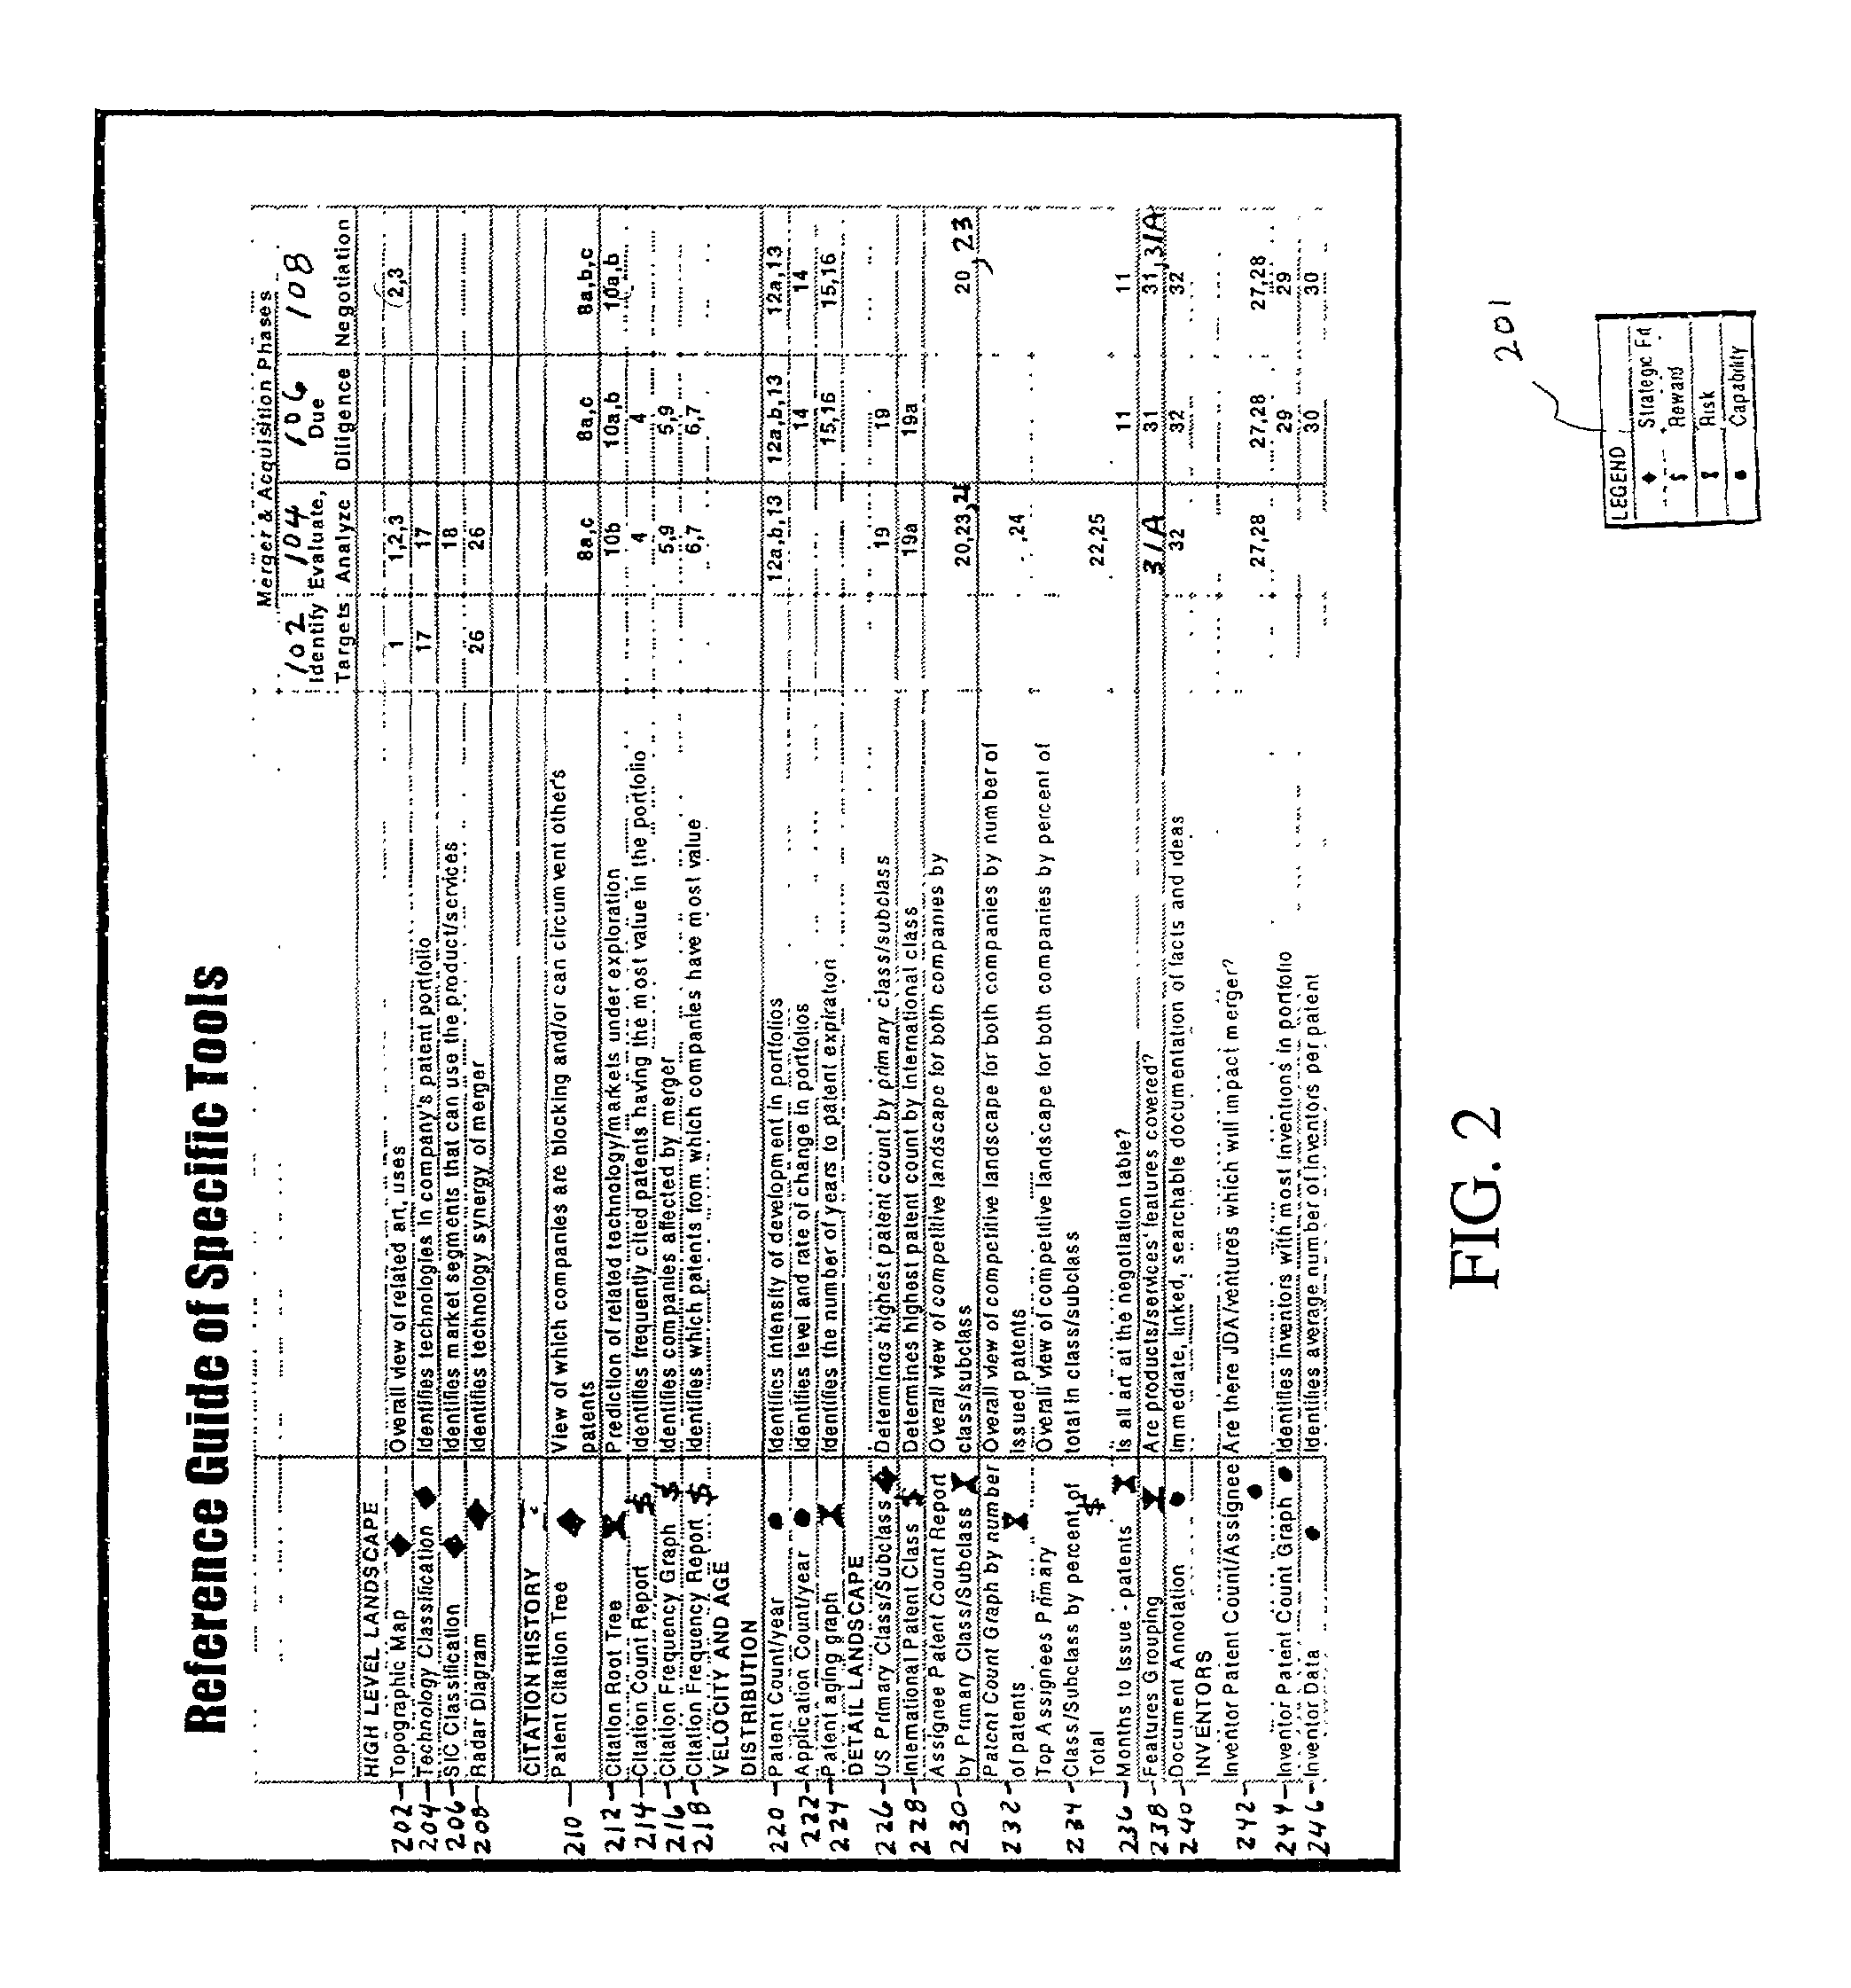 Patent-related tools and methodology for use in the merger and acquisition process